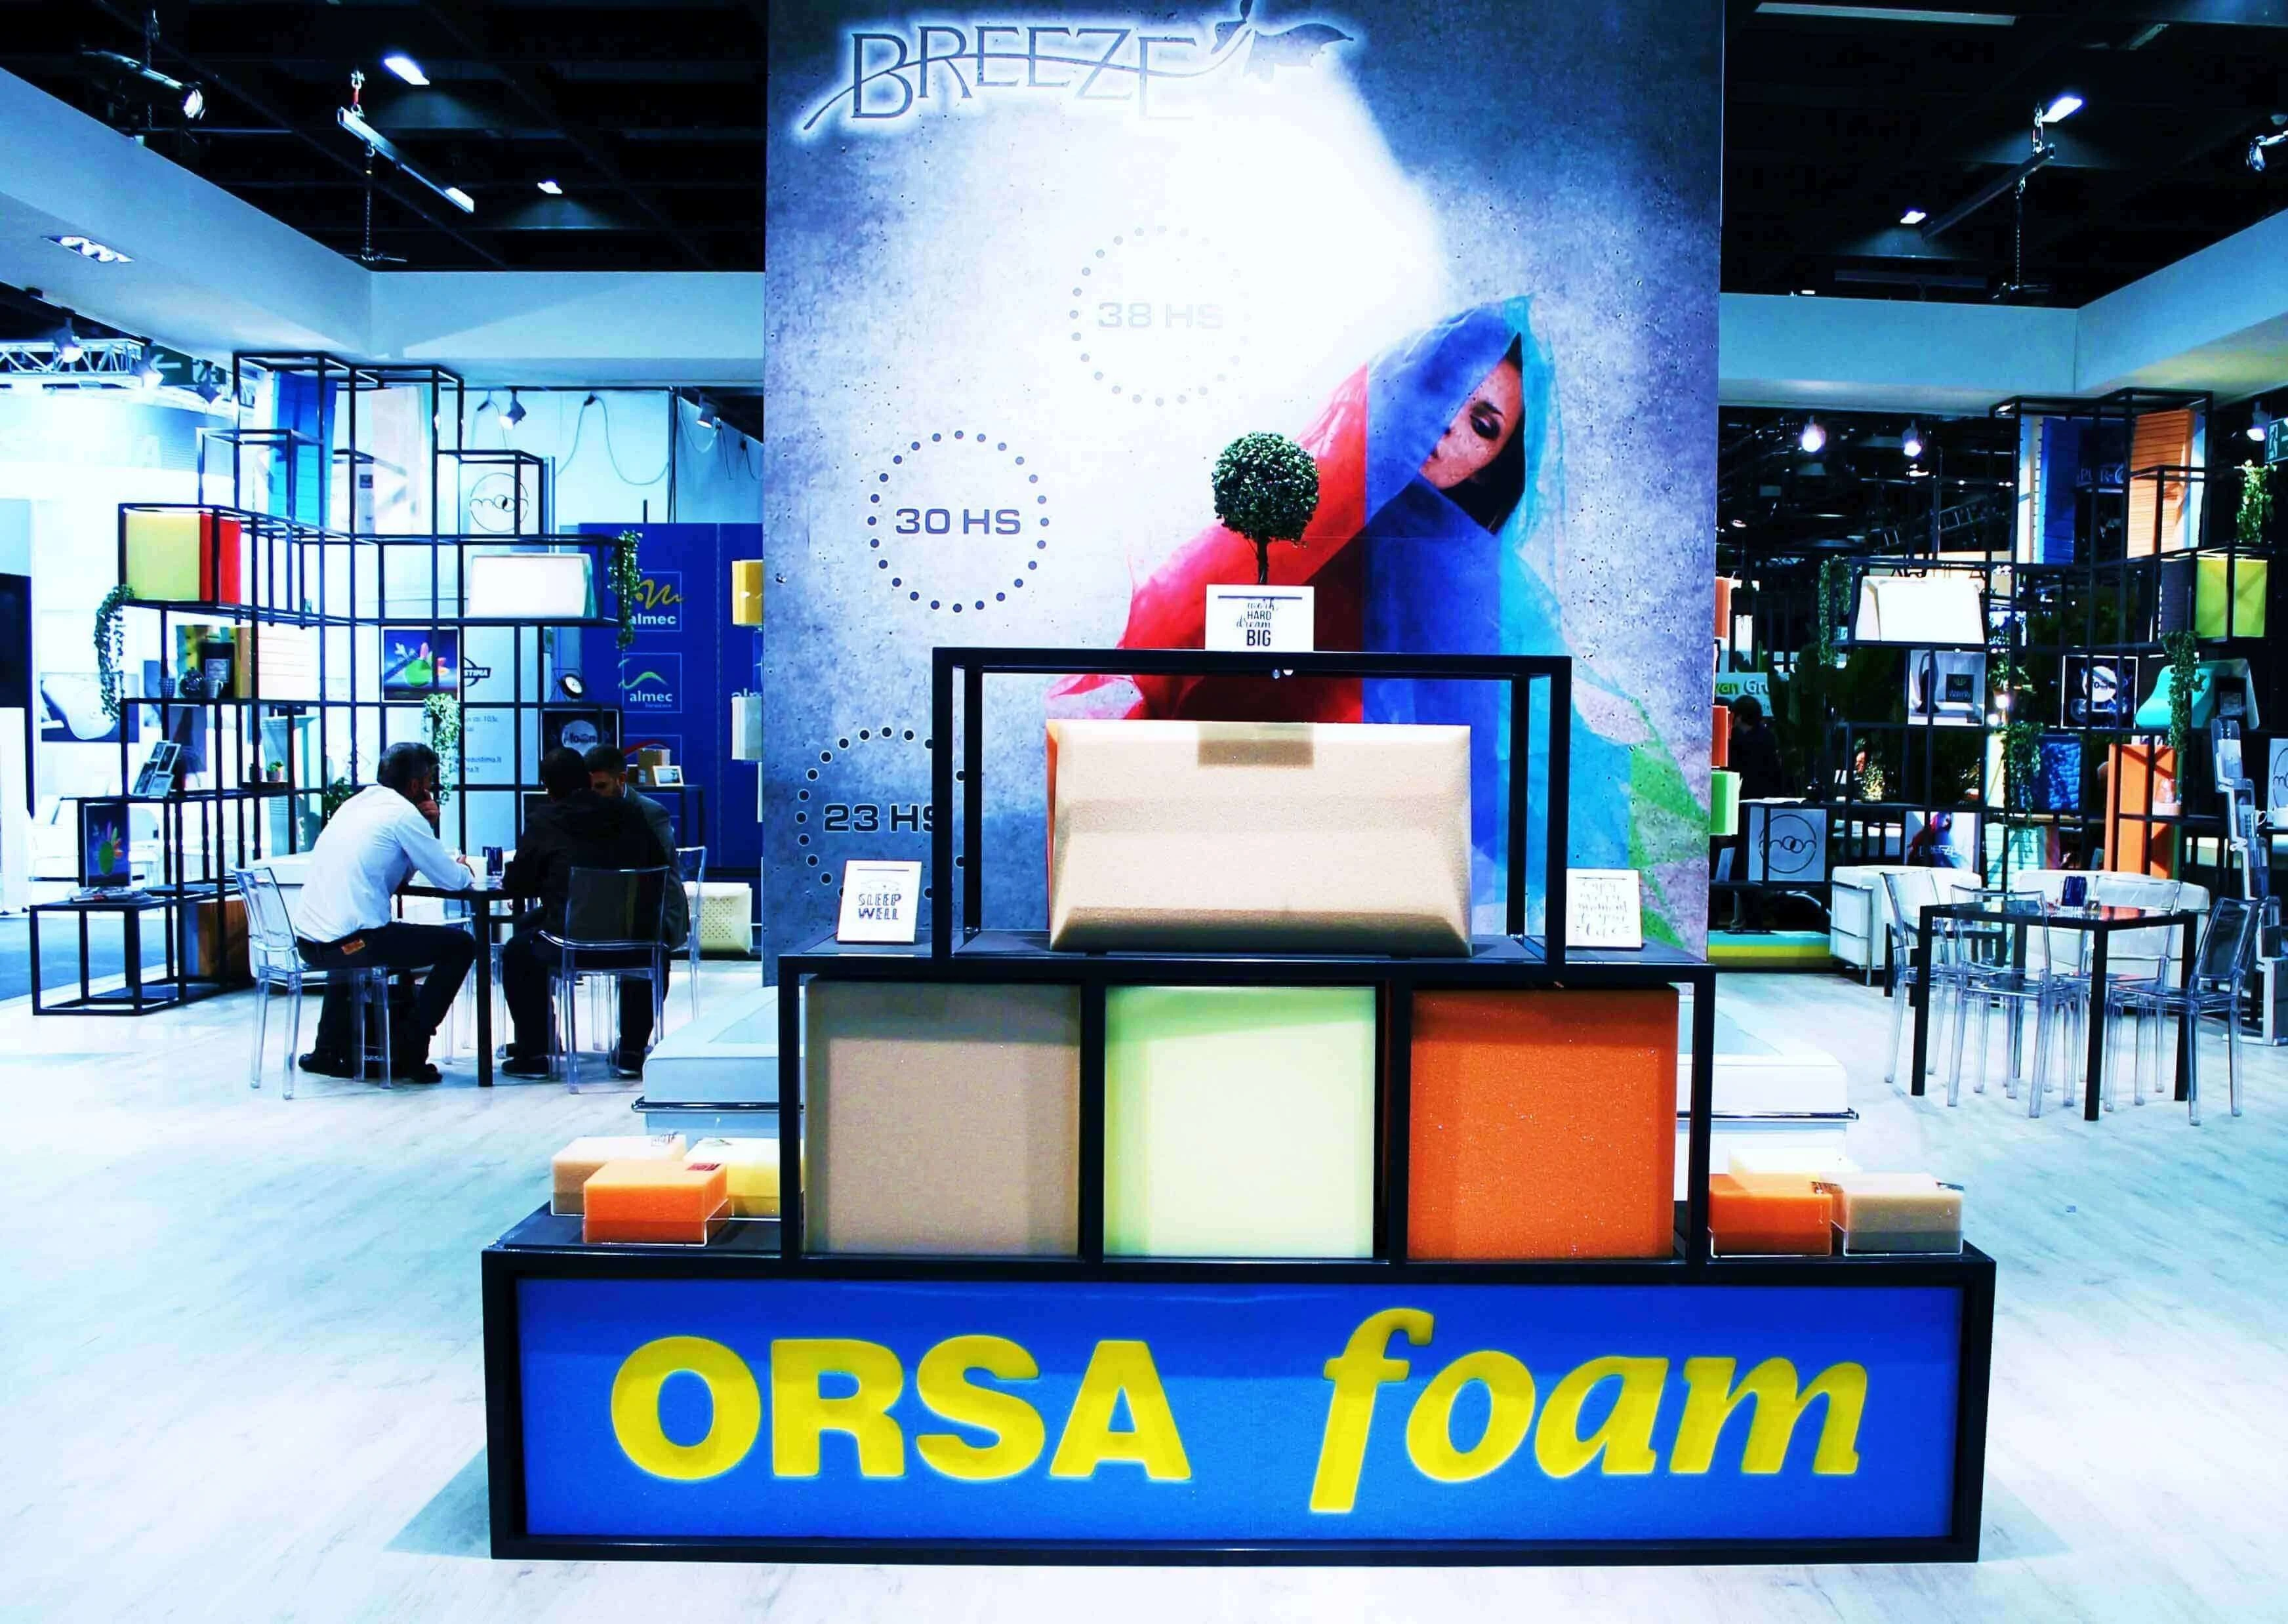 Flexible expanded polyurethanes Orsa foam: over 200 different types of products